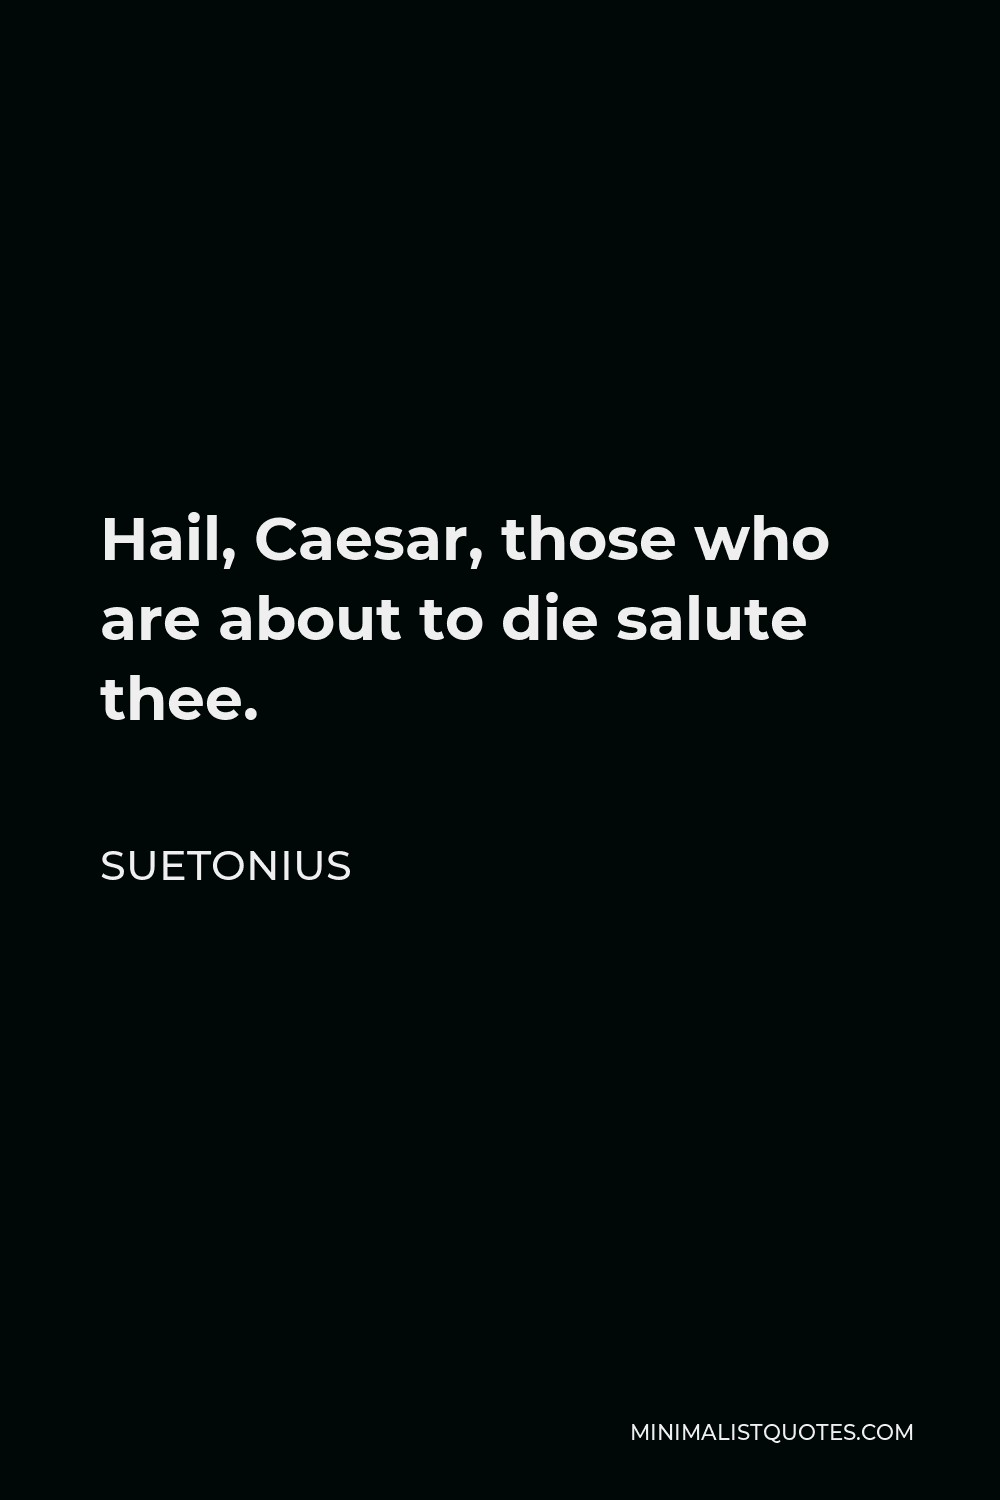 Suetonius Quote - Hail, Caesar, those who are about to die salute thee.